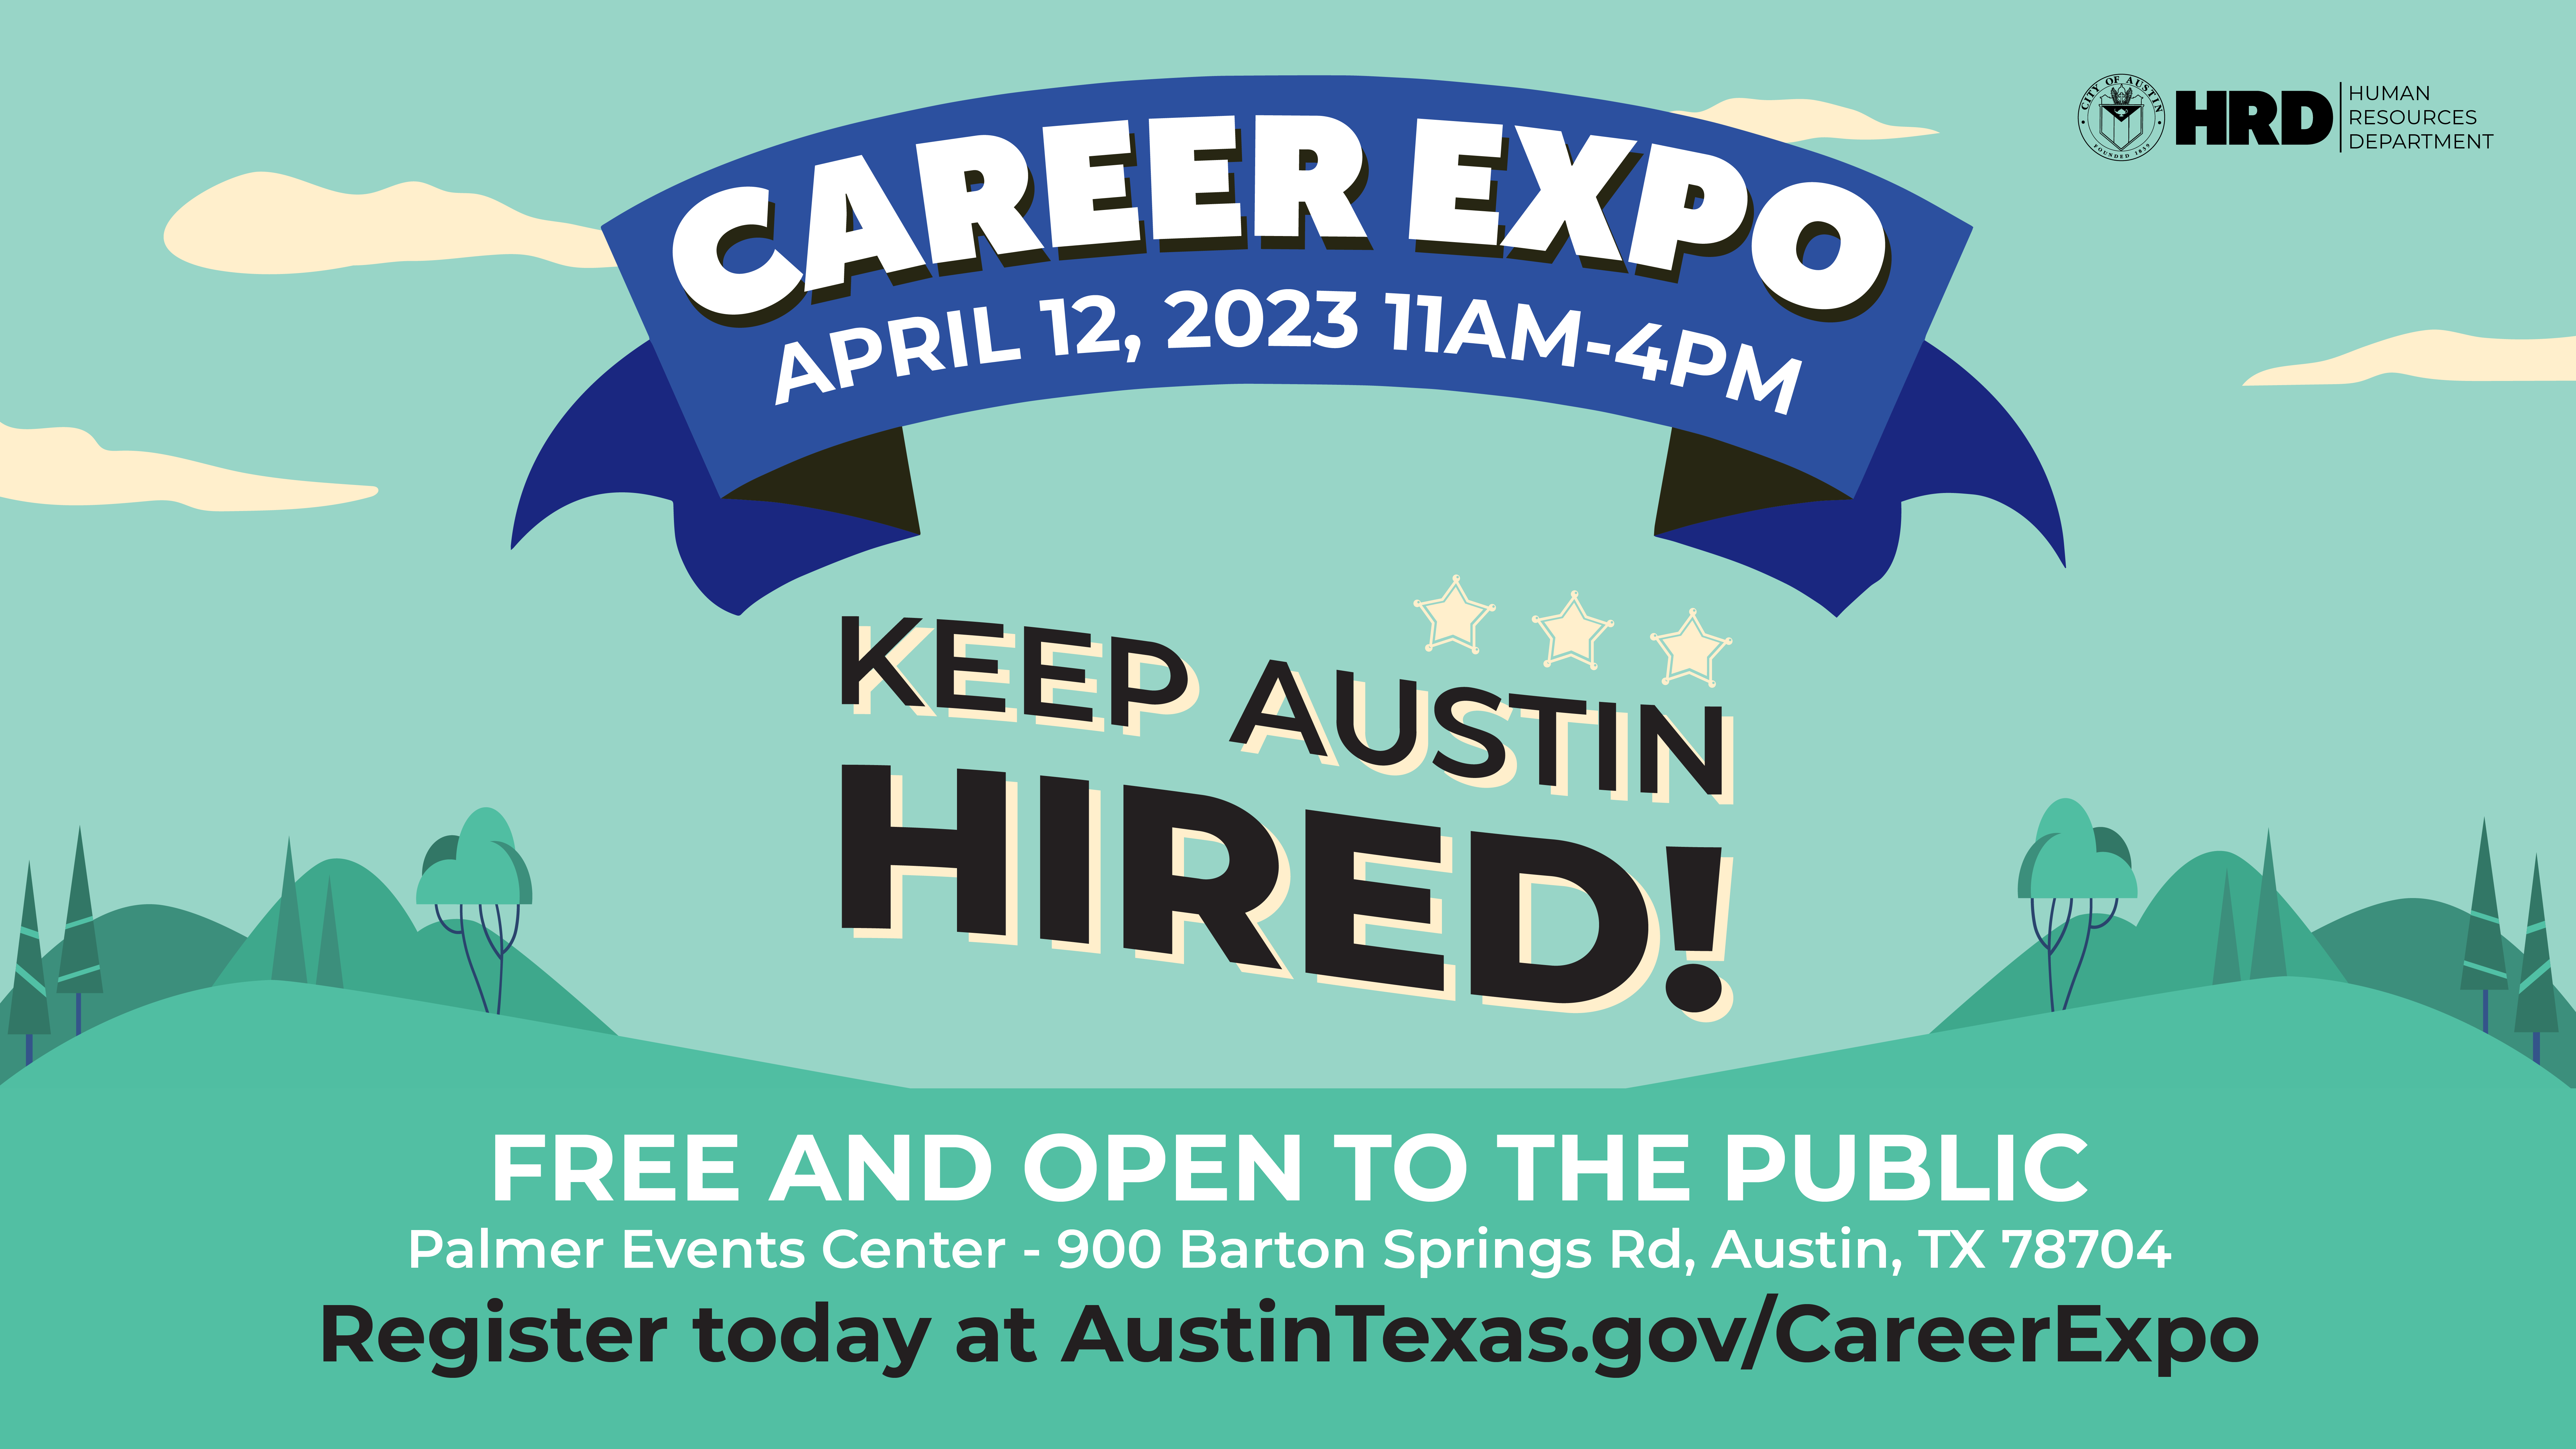 City of Austin's Career Expo Wednesday, April 12, 2023, from 11 a.m. to 4 p.m. at the Palmer Events Center.